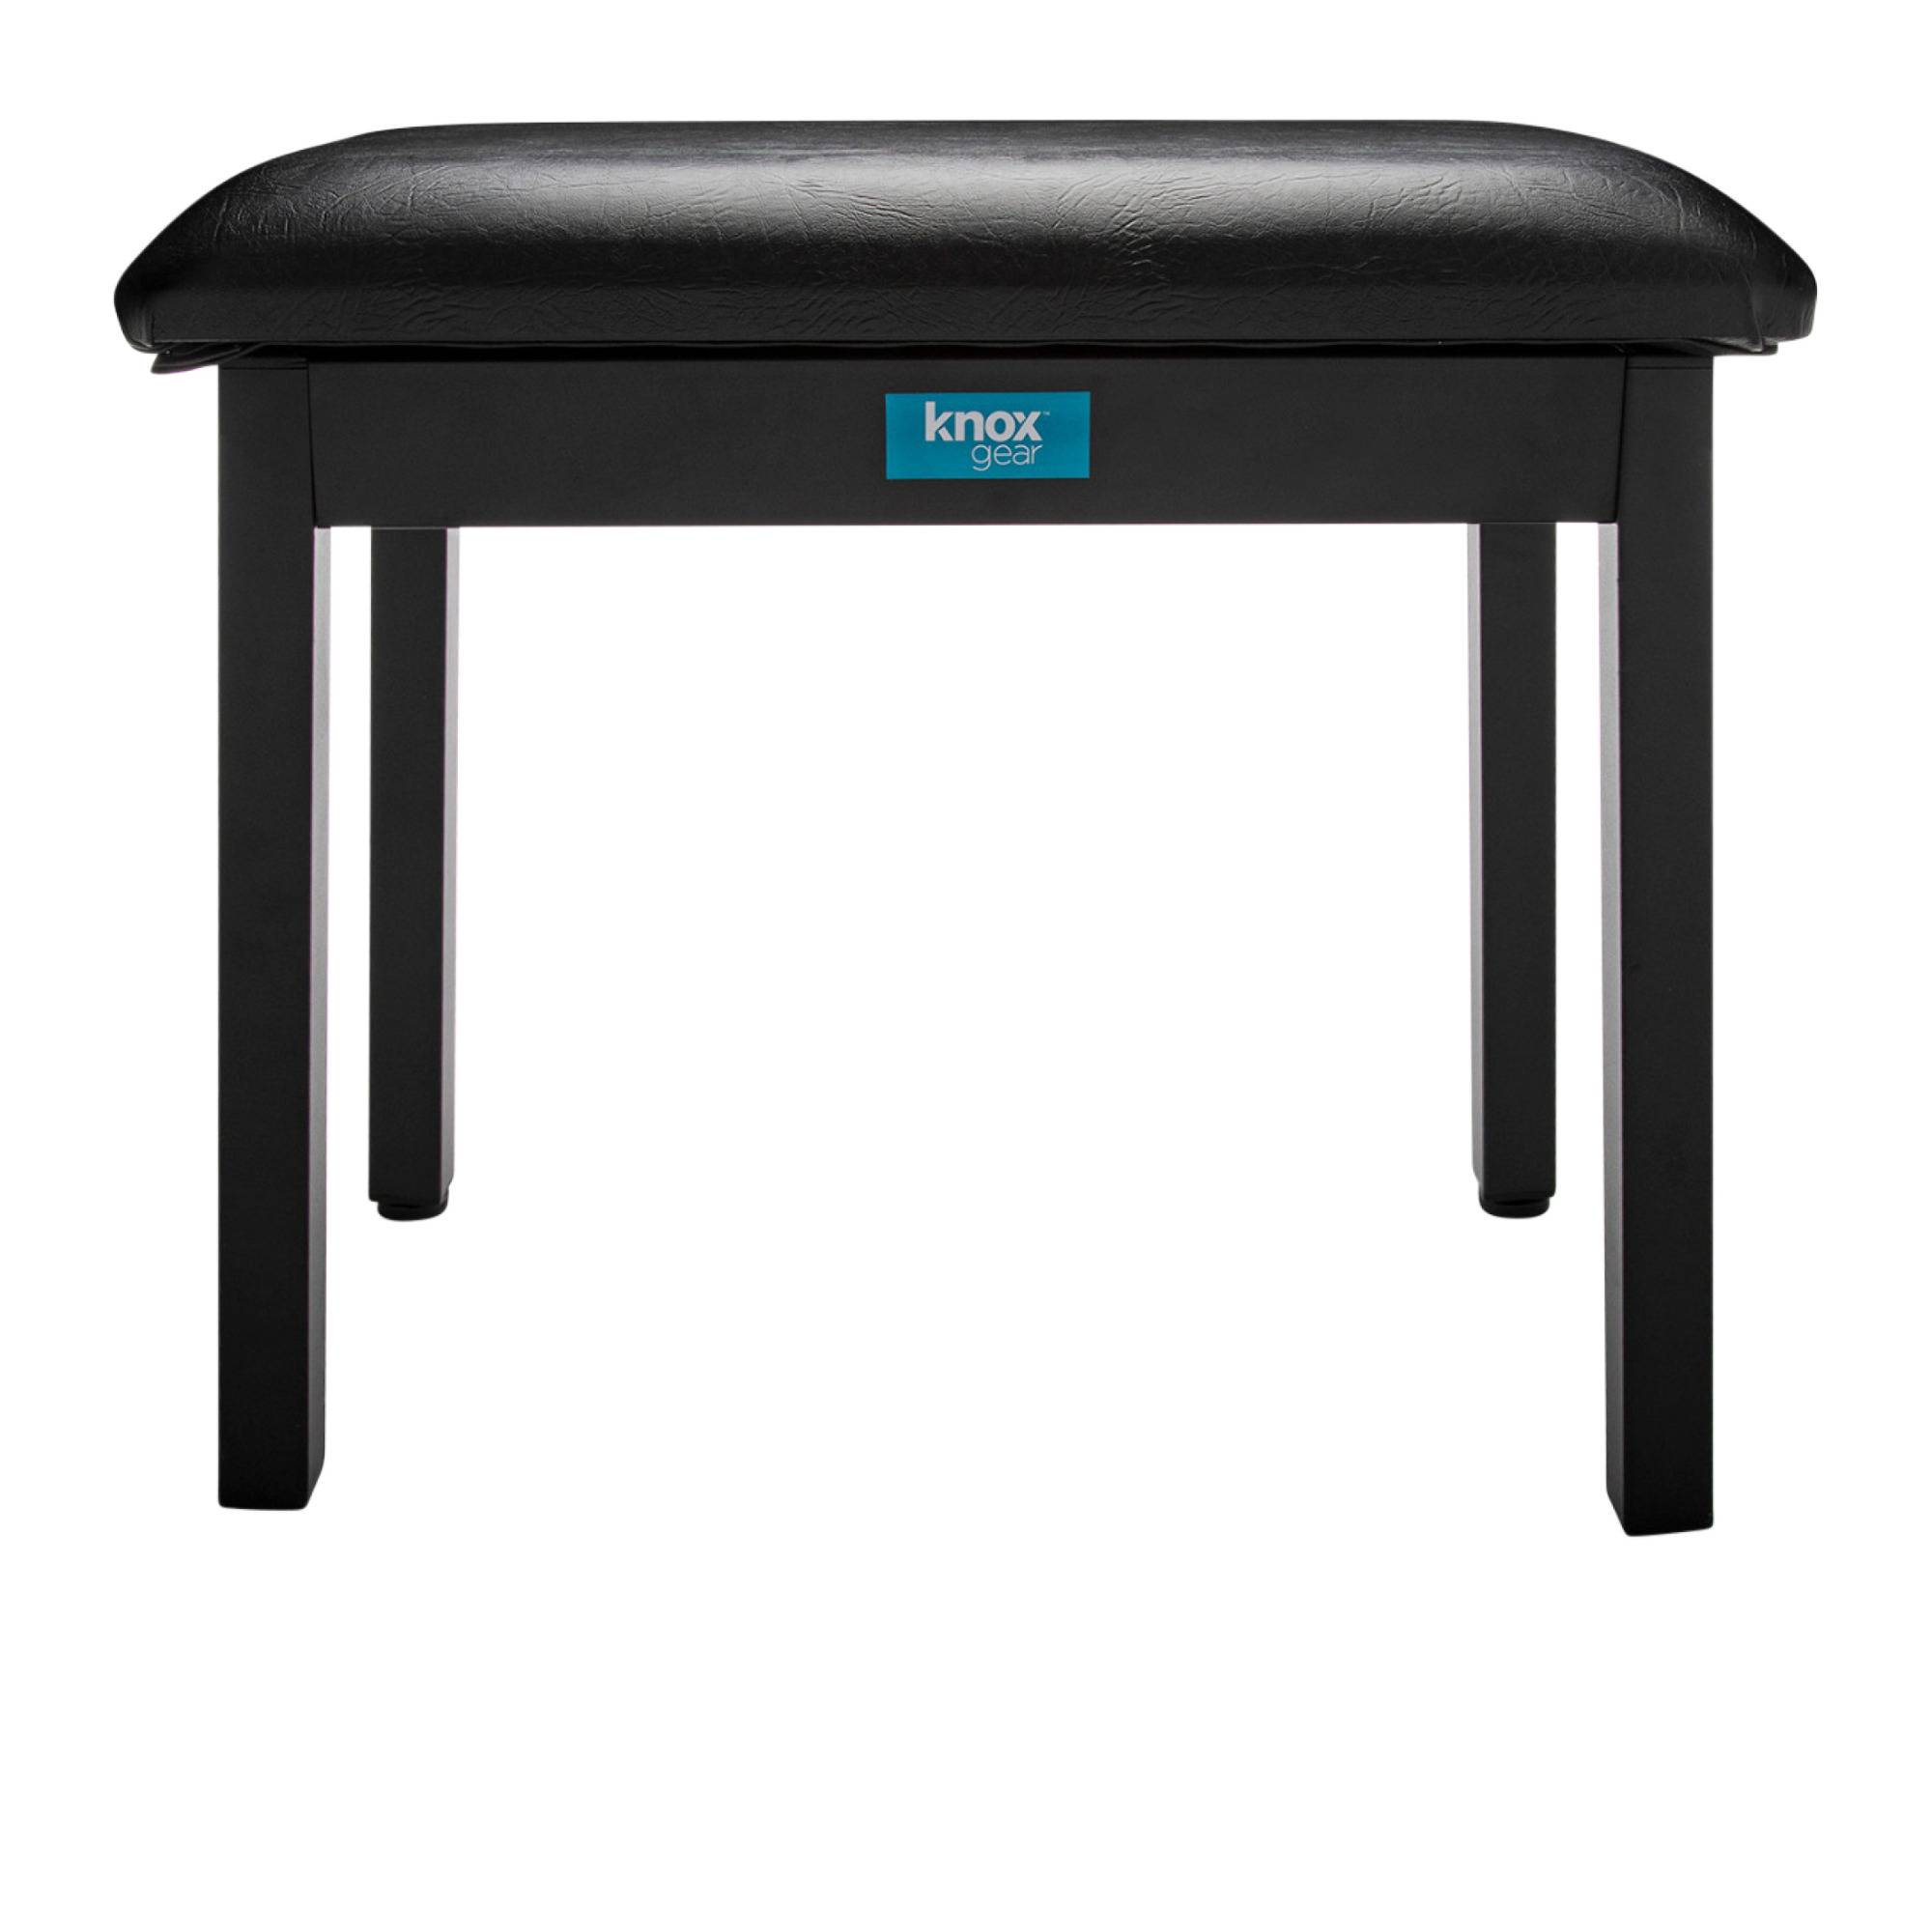 Knox Gear Furniture Style Flip-Top Piano Bench (Black)